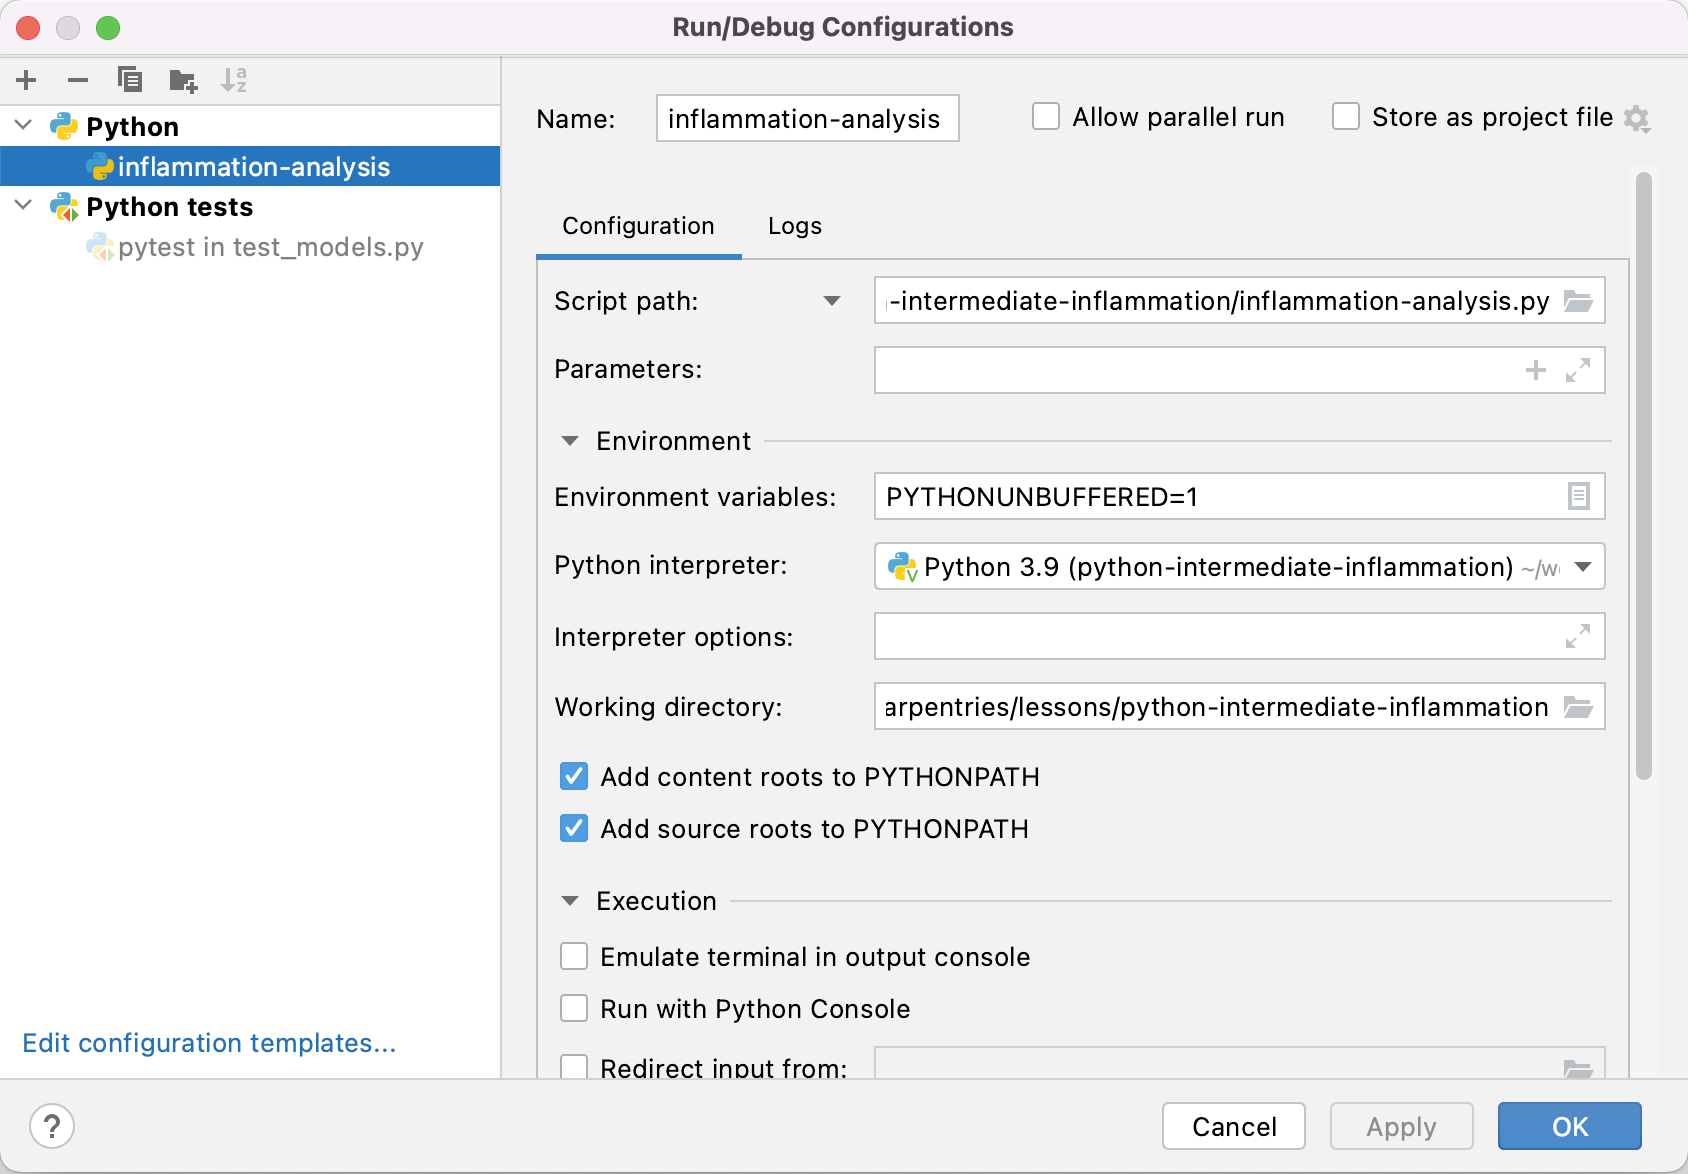 Ensuring testing configurations in PyCharm are correct